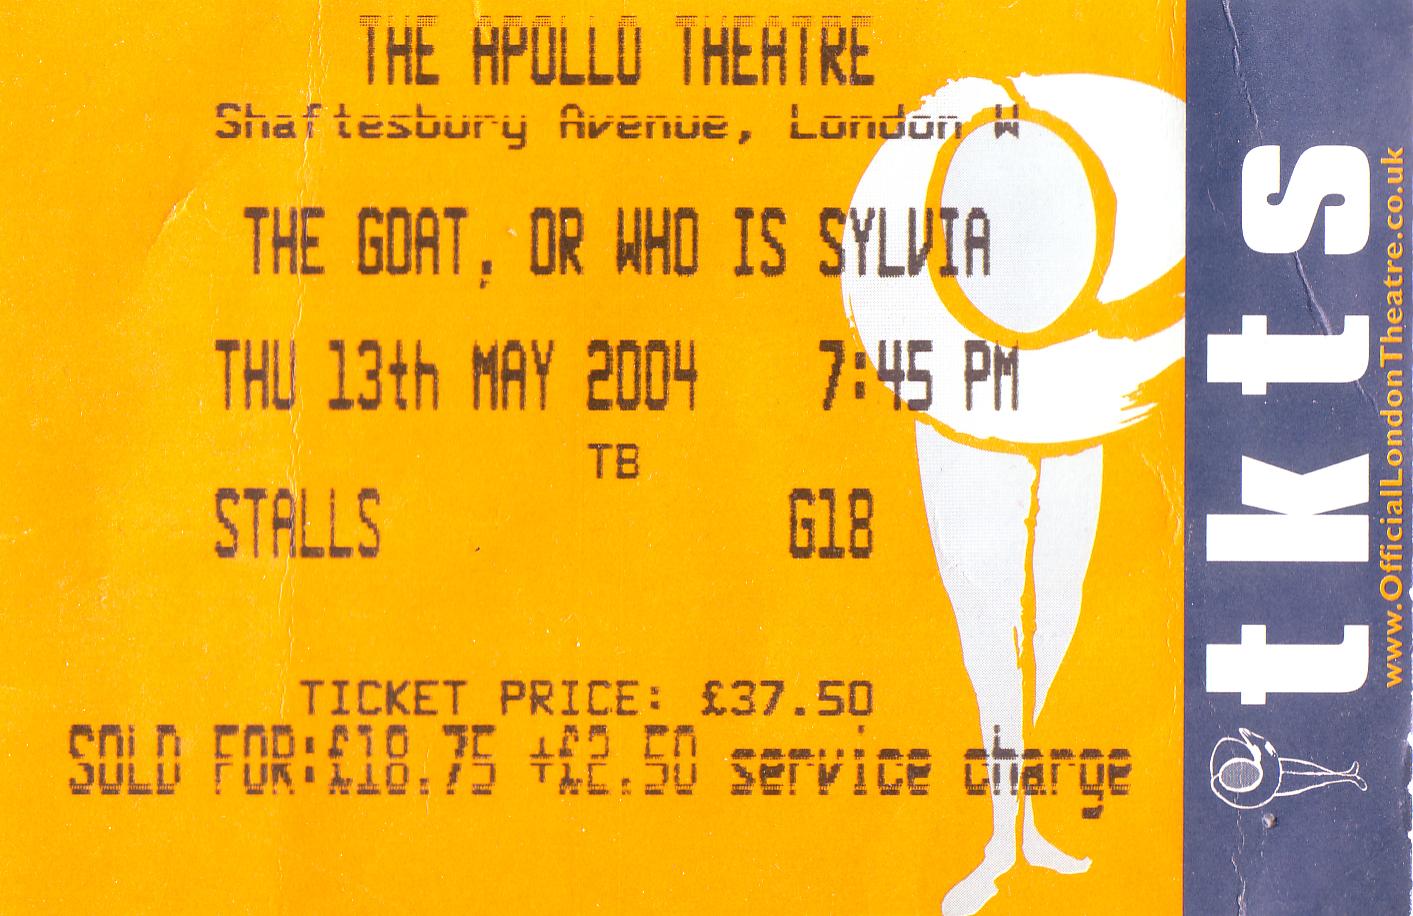 2004-05-13-The Goat (or Who Is Sylvia)